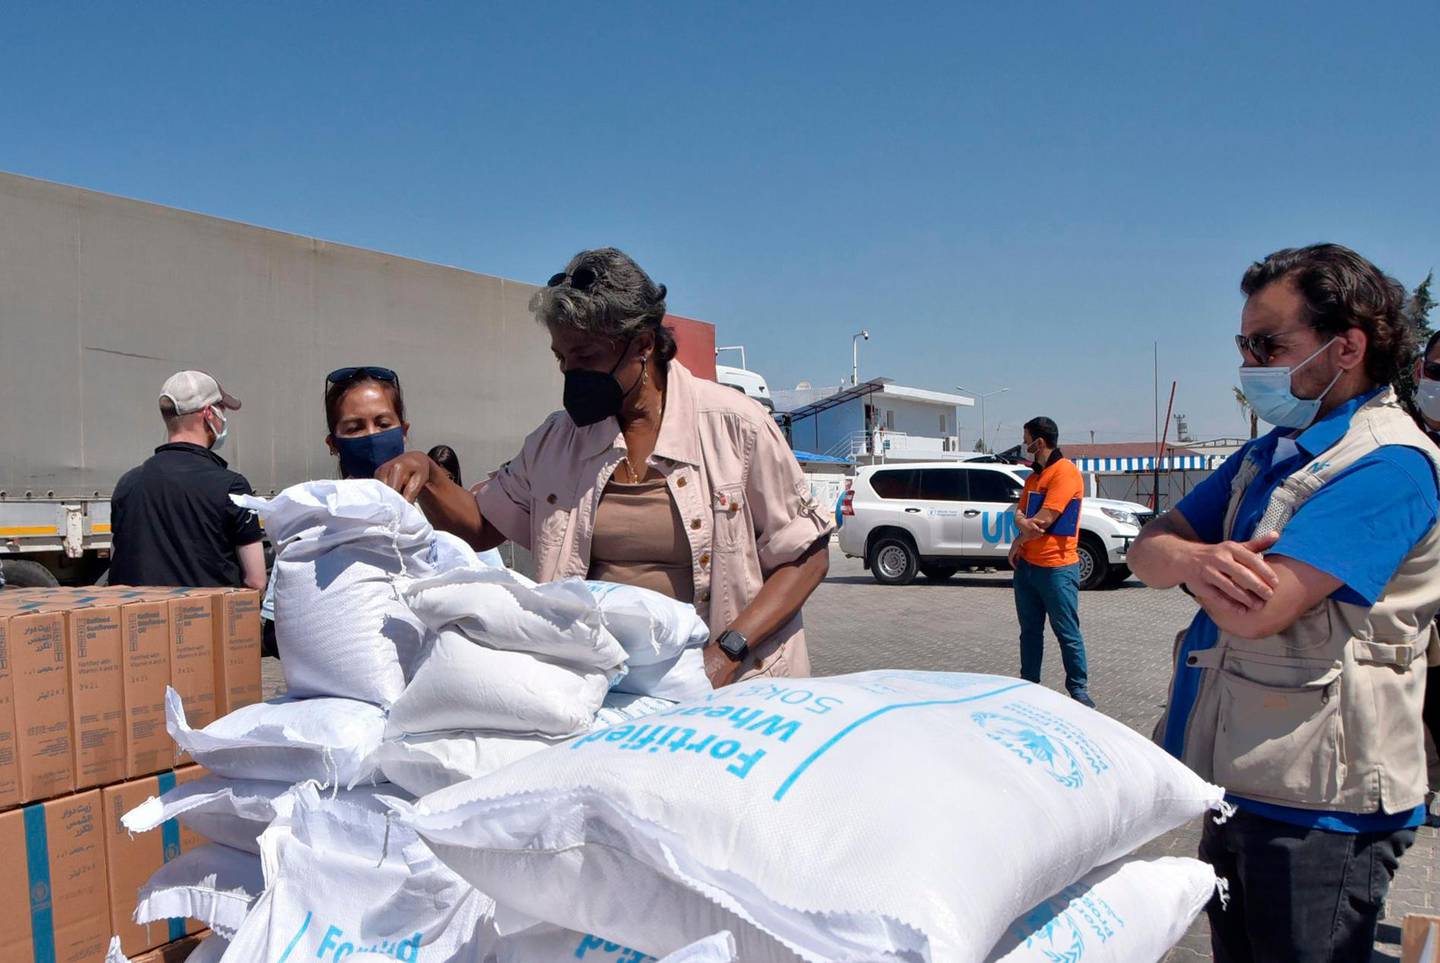 FILE - In this June 3, 2021 handout file photo provided by the US Embassy in Turkey, Linda Thomas-Greenfield, U.S. Ambassador to the United Nations, examines aid materials at the Bab al-Hawa border crossing between Turkey and Syria. Millions of Syrians risk losing access to lifesaving aid, including food and COVID-19 vaccines if Russia gets its way at the Security Council by blocking the use of the last remaining cross-border aid corridor into northwestern Syria, an international rights group said Thursday, June 10. (US Embassy in Turkey via AP)